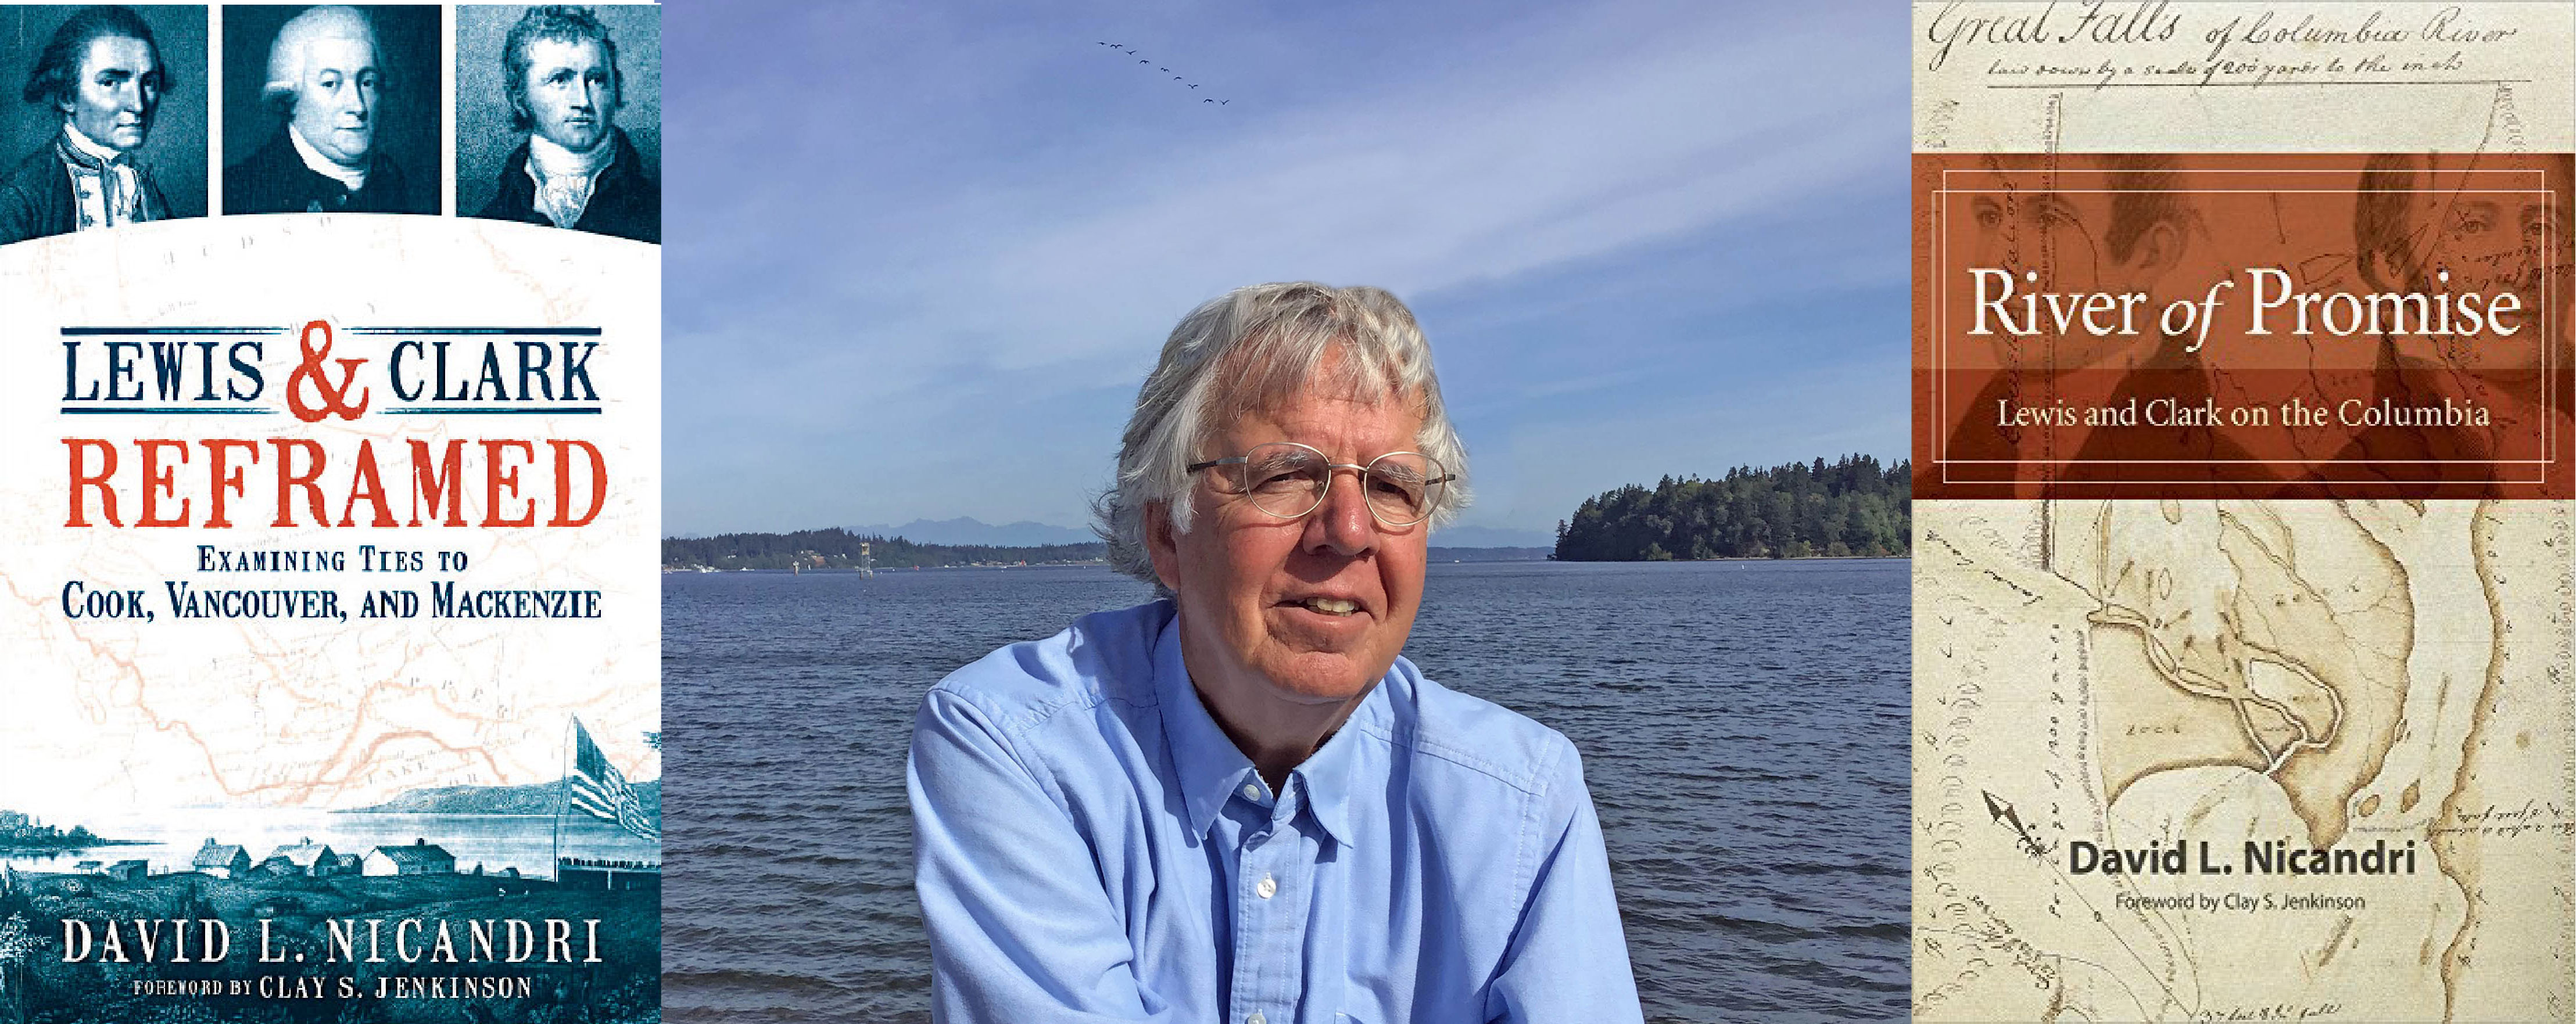 Photo of man in front of water in blue shirt with white hair and glasses. To left a book cover reads: Lewis & Clark Reframed, Examining Ties to Cook, Vancouver, and Mackenzie. Book cover to right reads: River of Promise, Lewis and Clark on the Columbia.